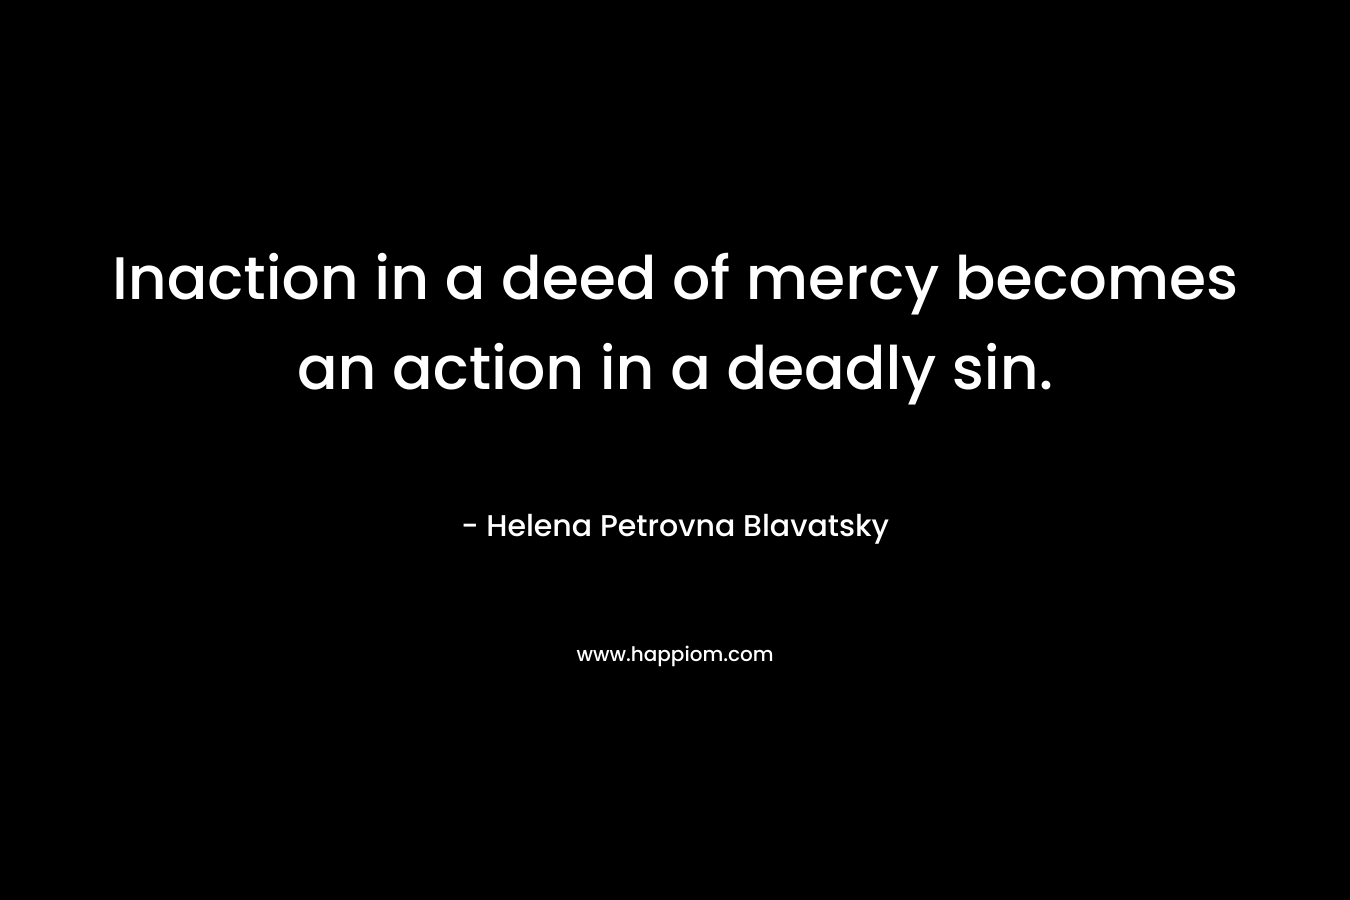 Inaction in a deed of mercy becomes an action in a deadly sin. – Helena Petrovna Blavatsky